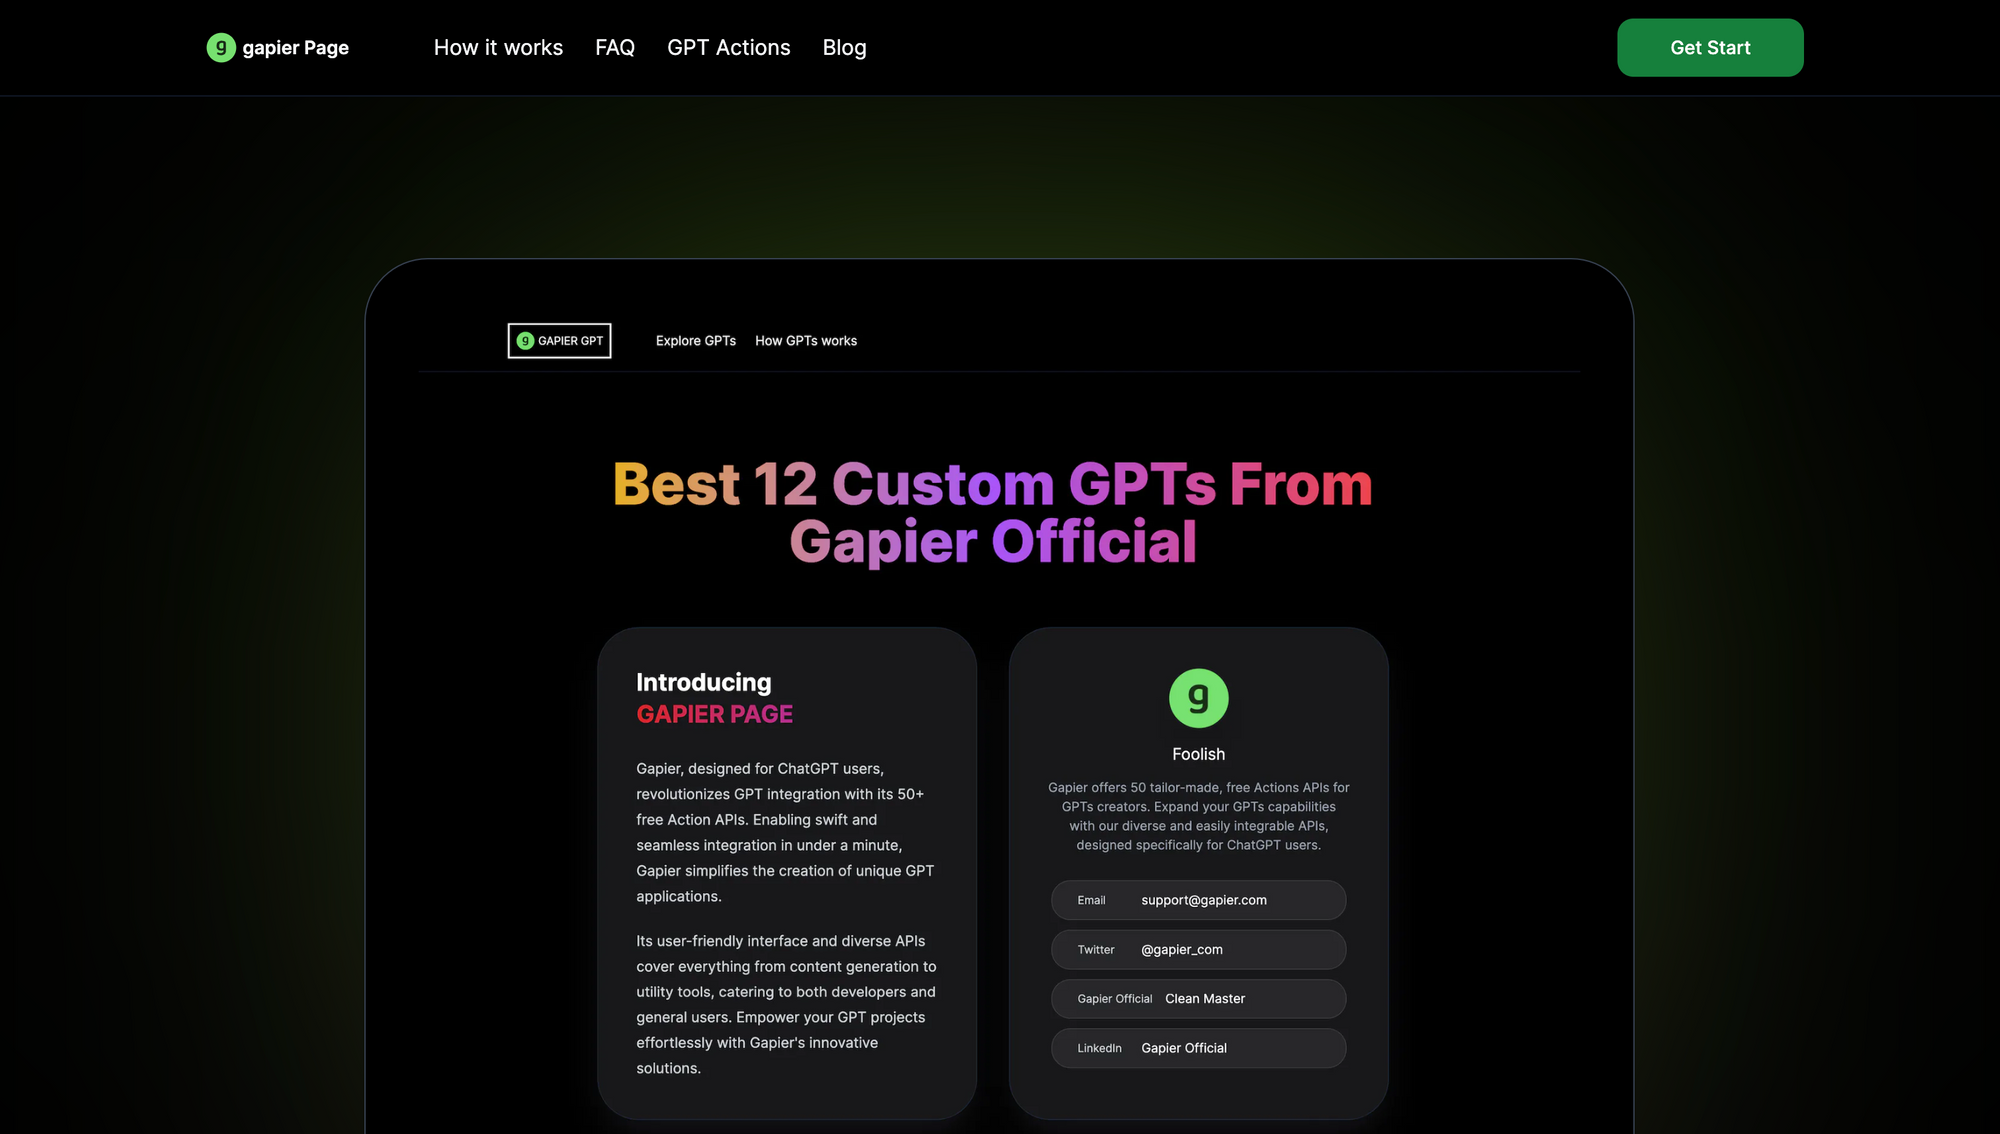 Gapier Page Beta Launches!